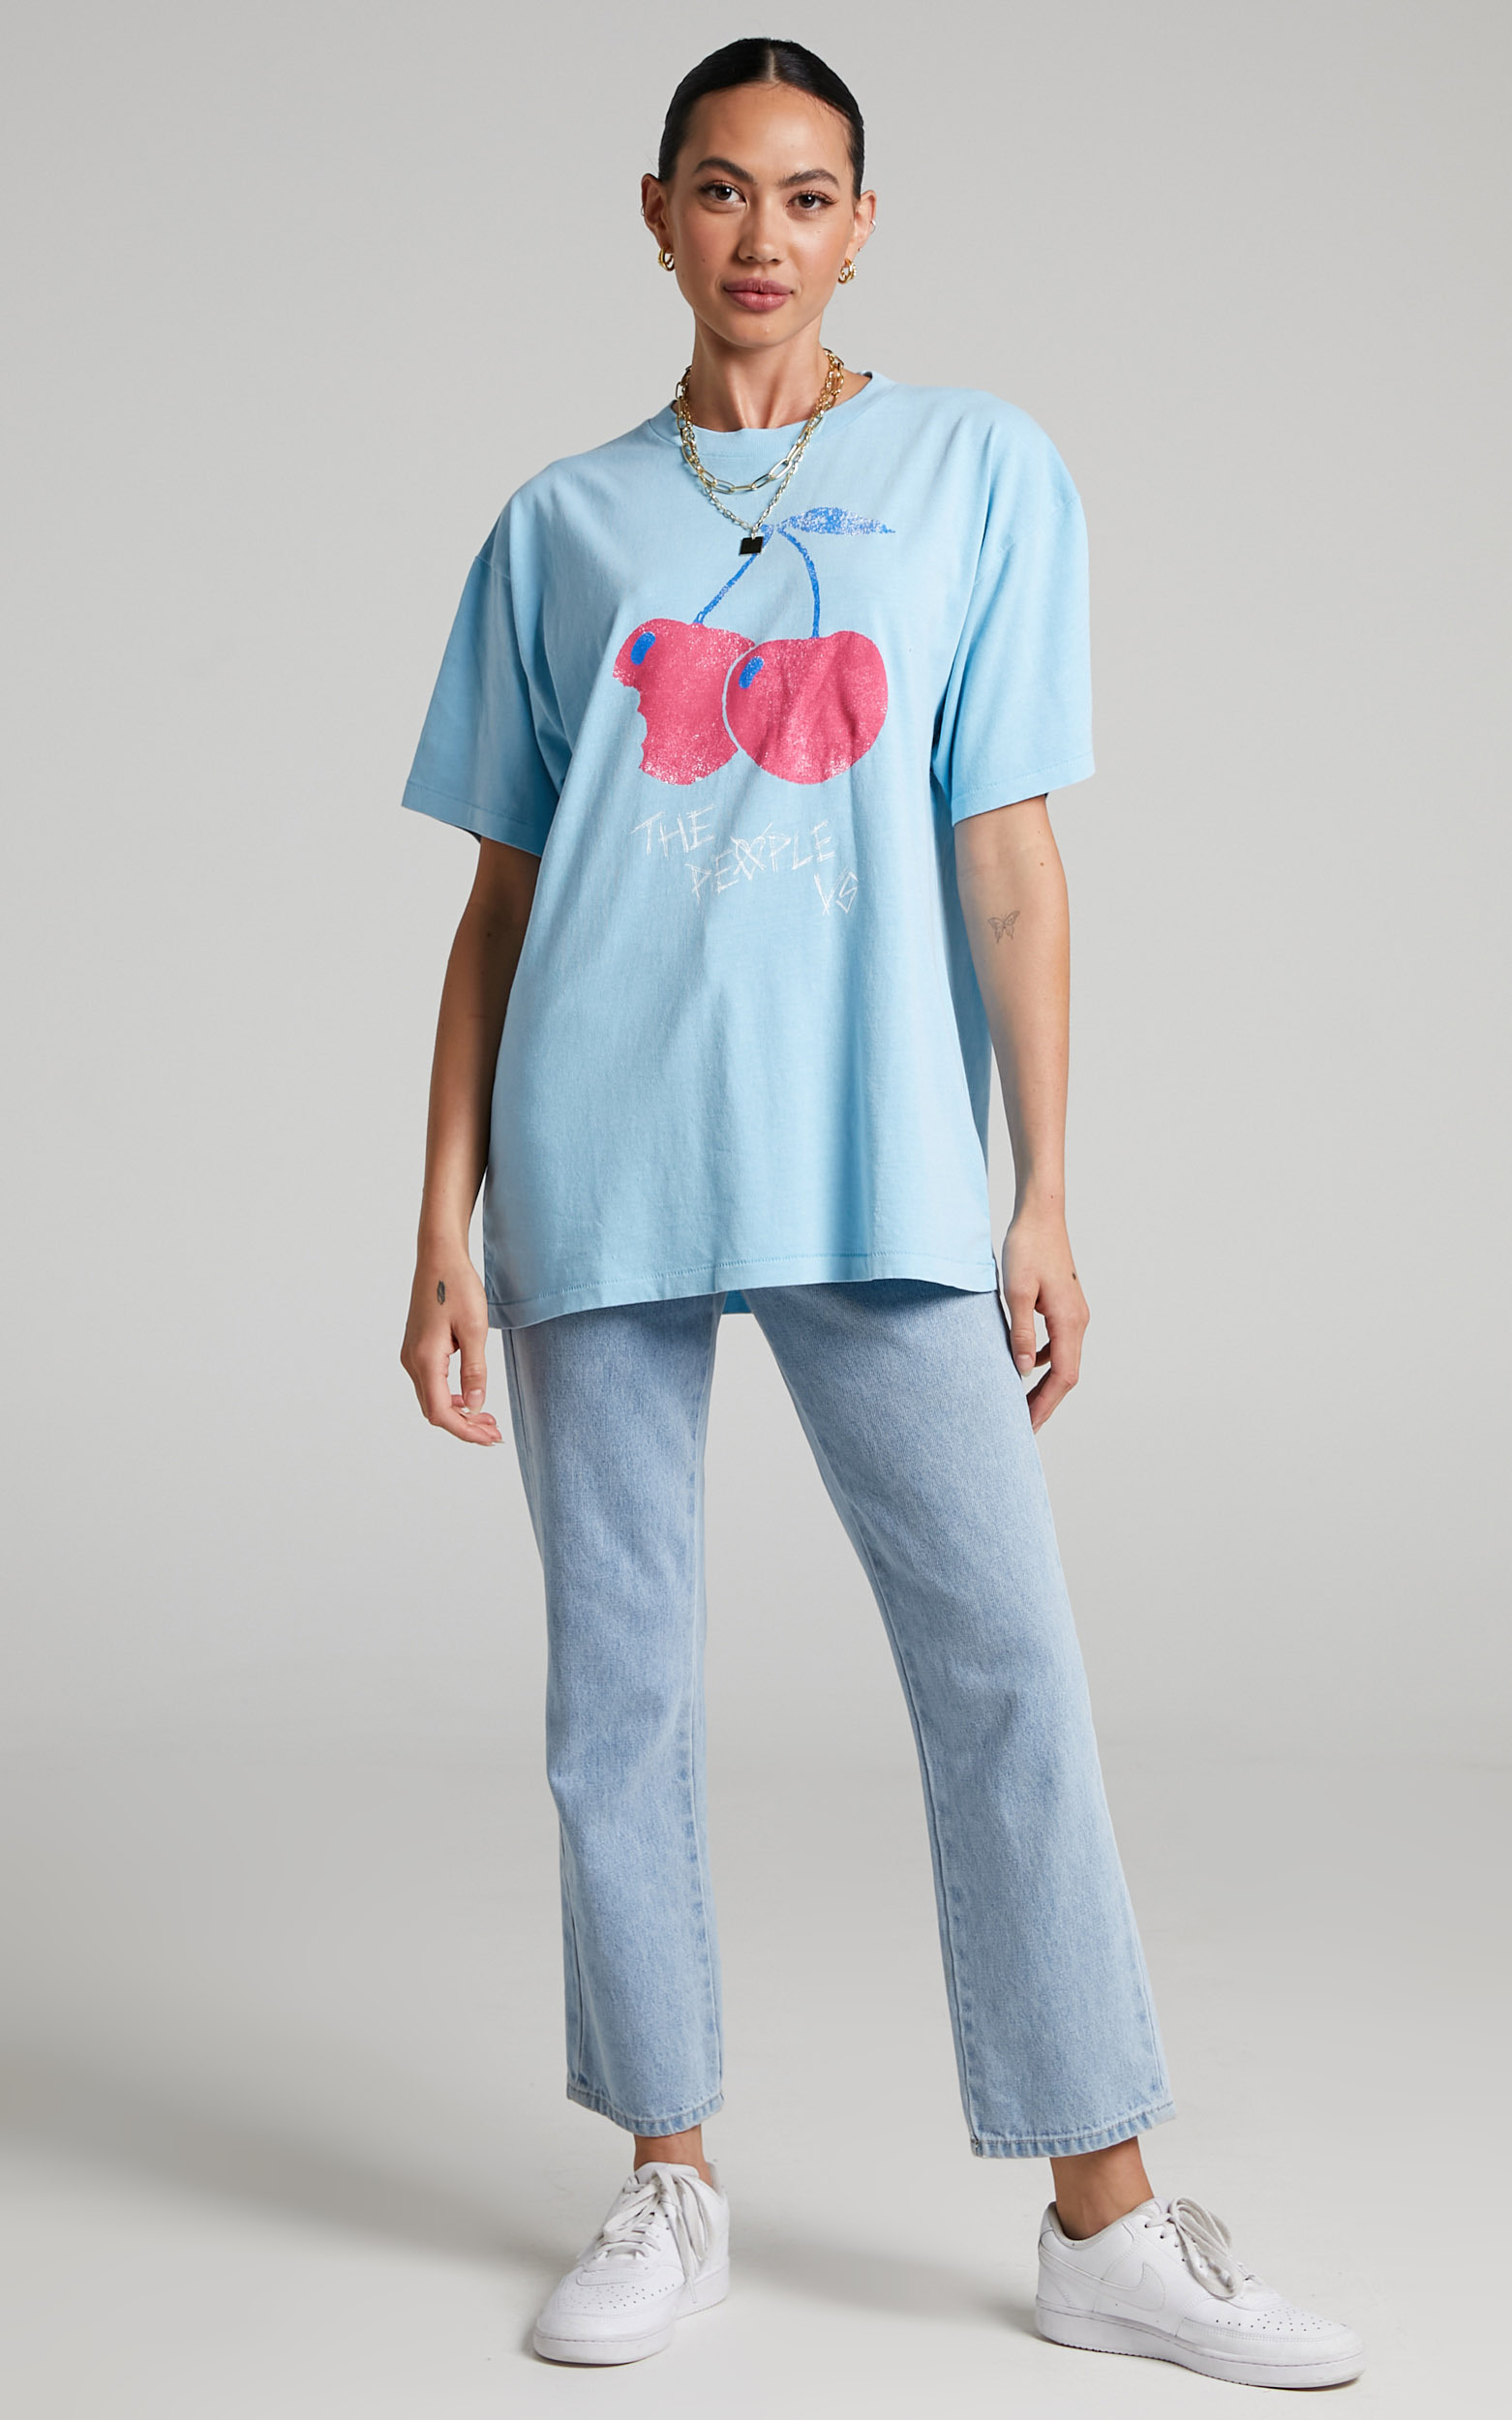 The People Vs - Sour Cherry Boyfriend Tee in Dusty Blue - XS, BLU1, hi-res image number null